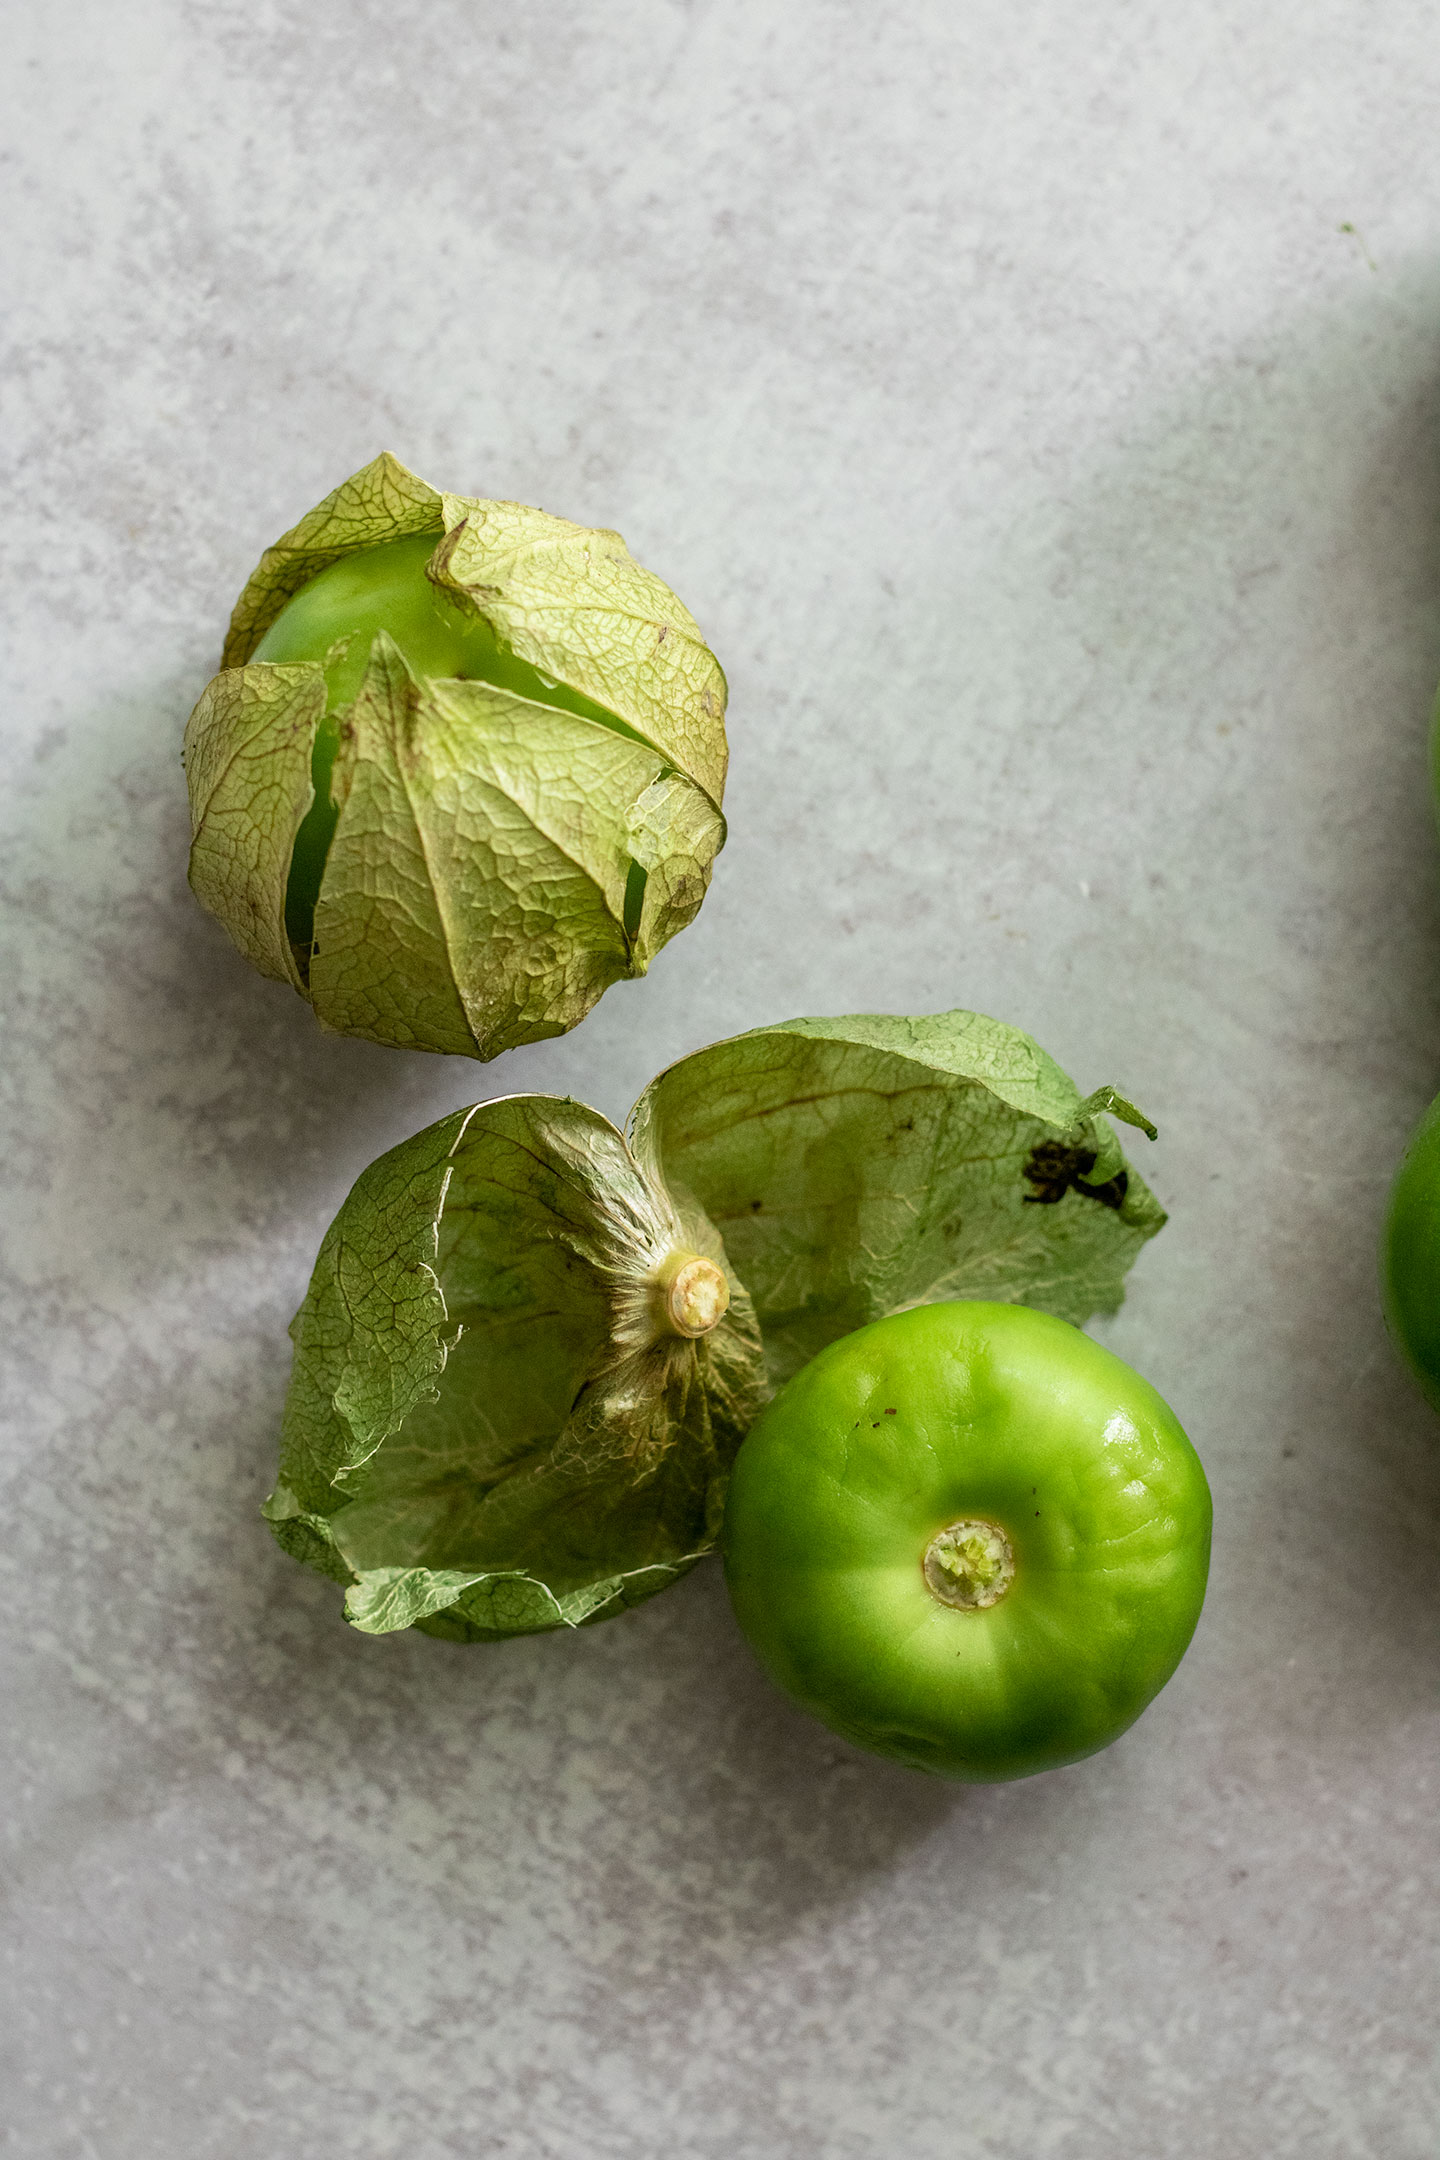 Peeling the husk off of the tomatillos.